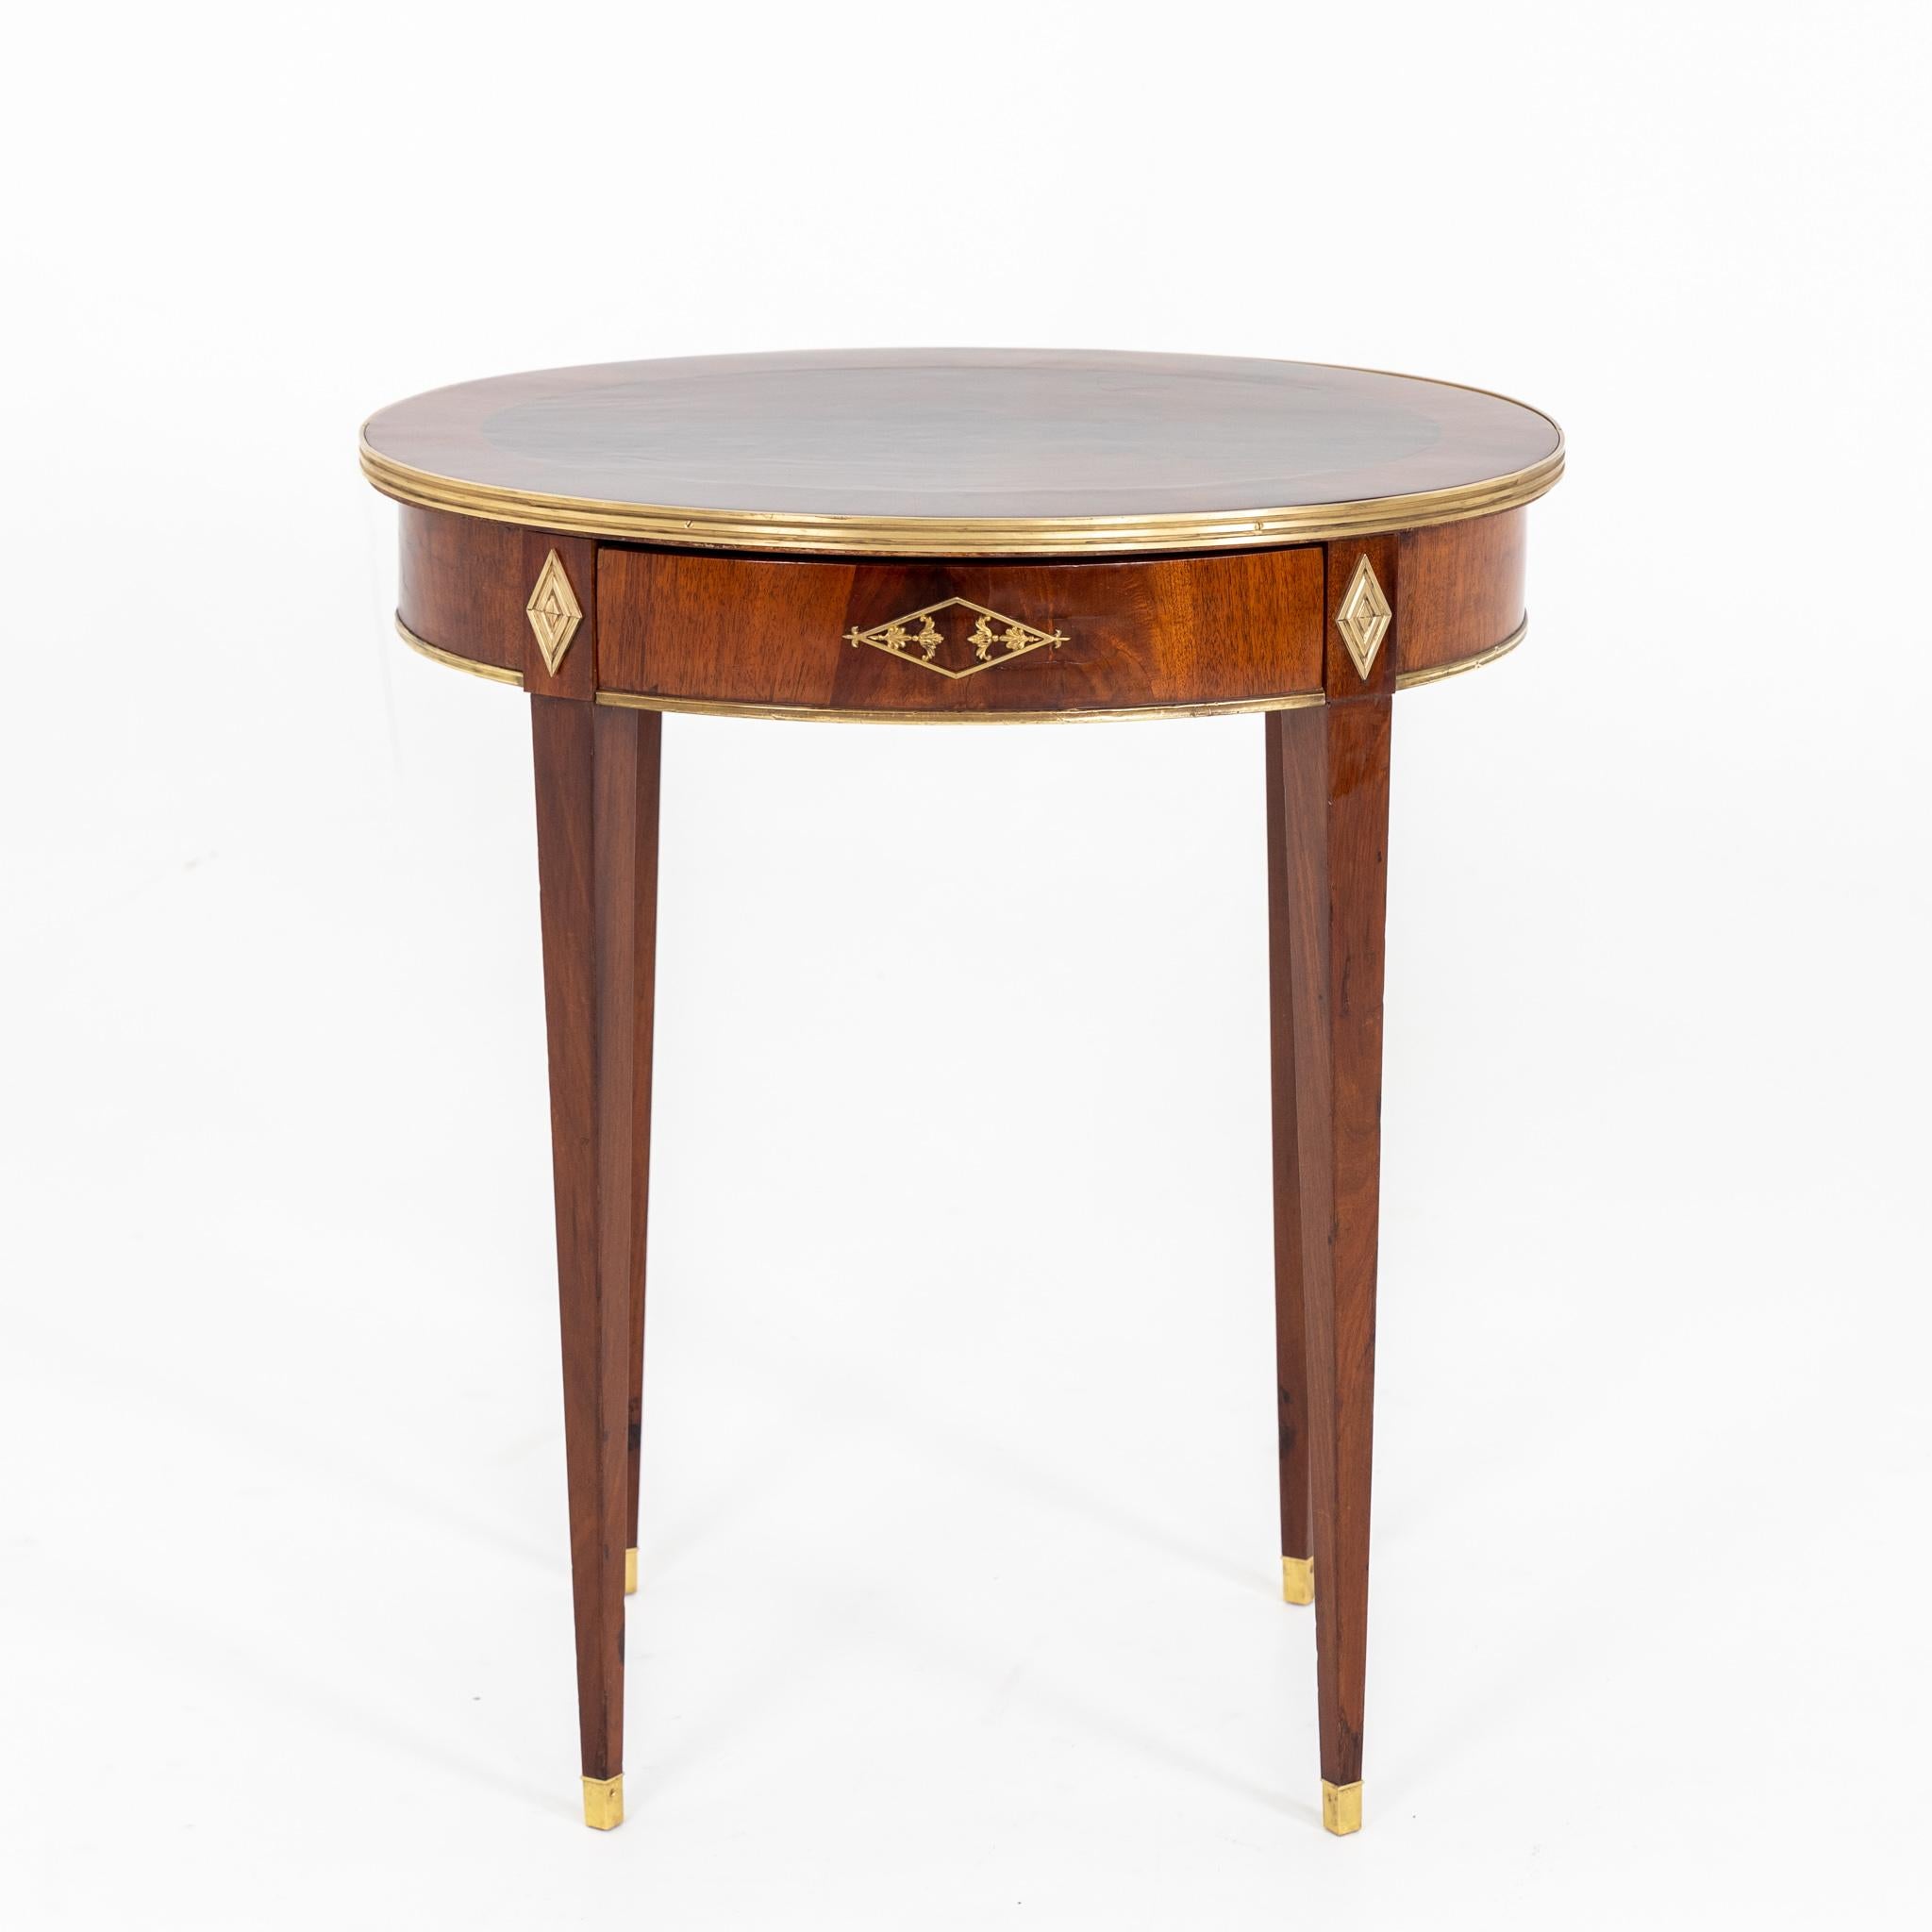 Oval side table with Fine brass inlays in mahogany, solid and veneered.